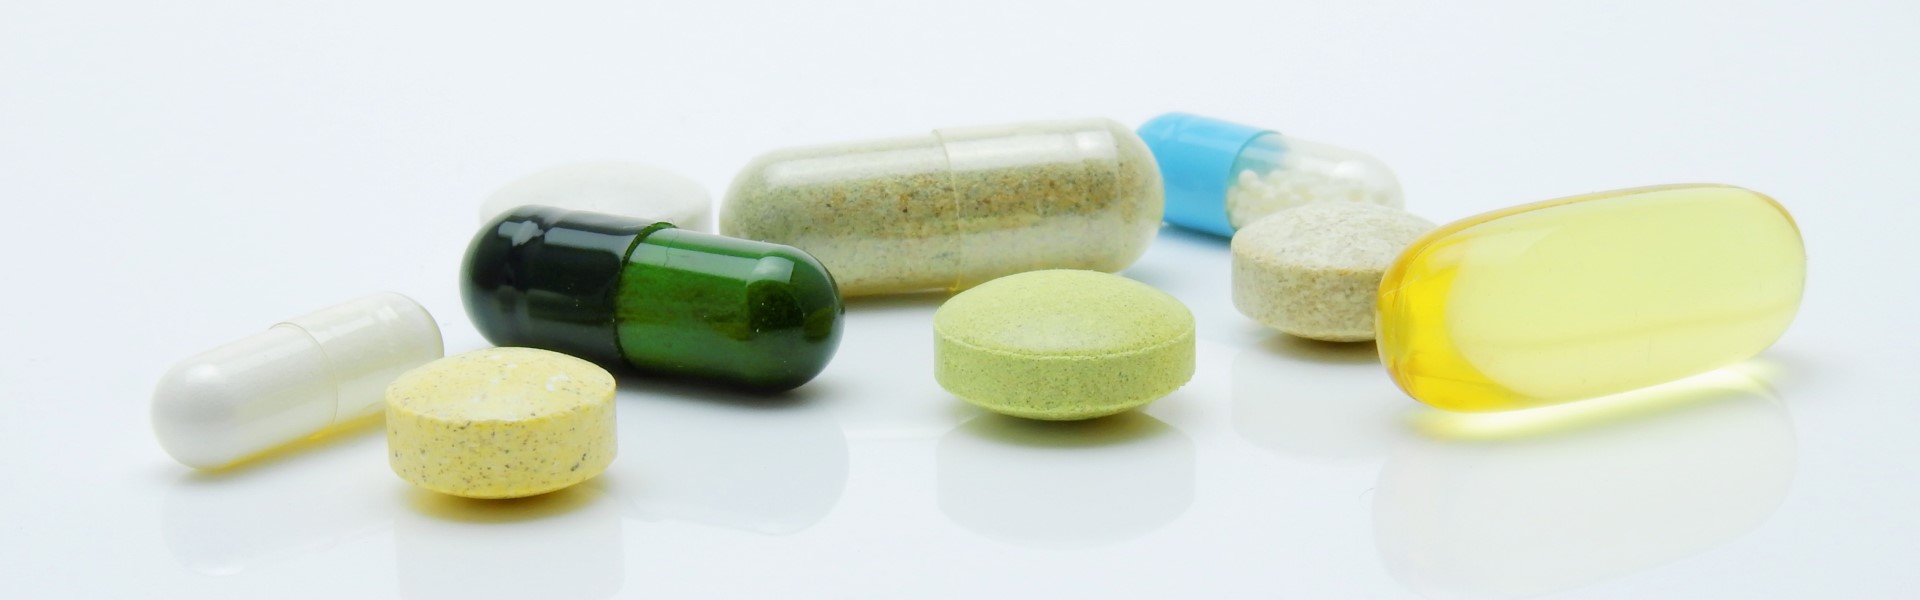 Close-up of more capsules and tablets